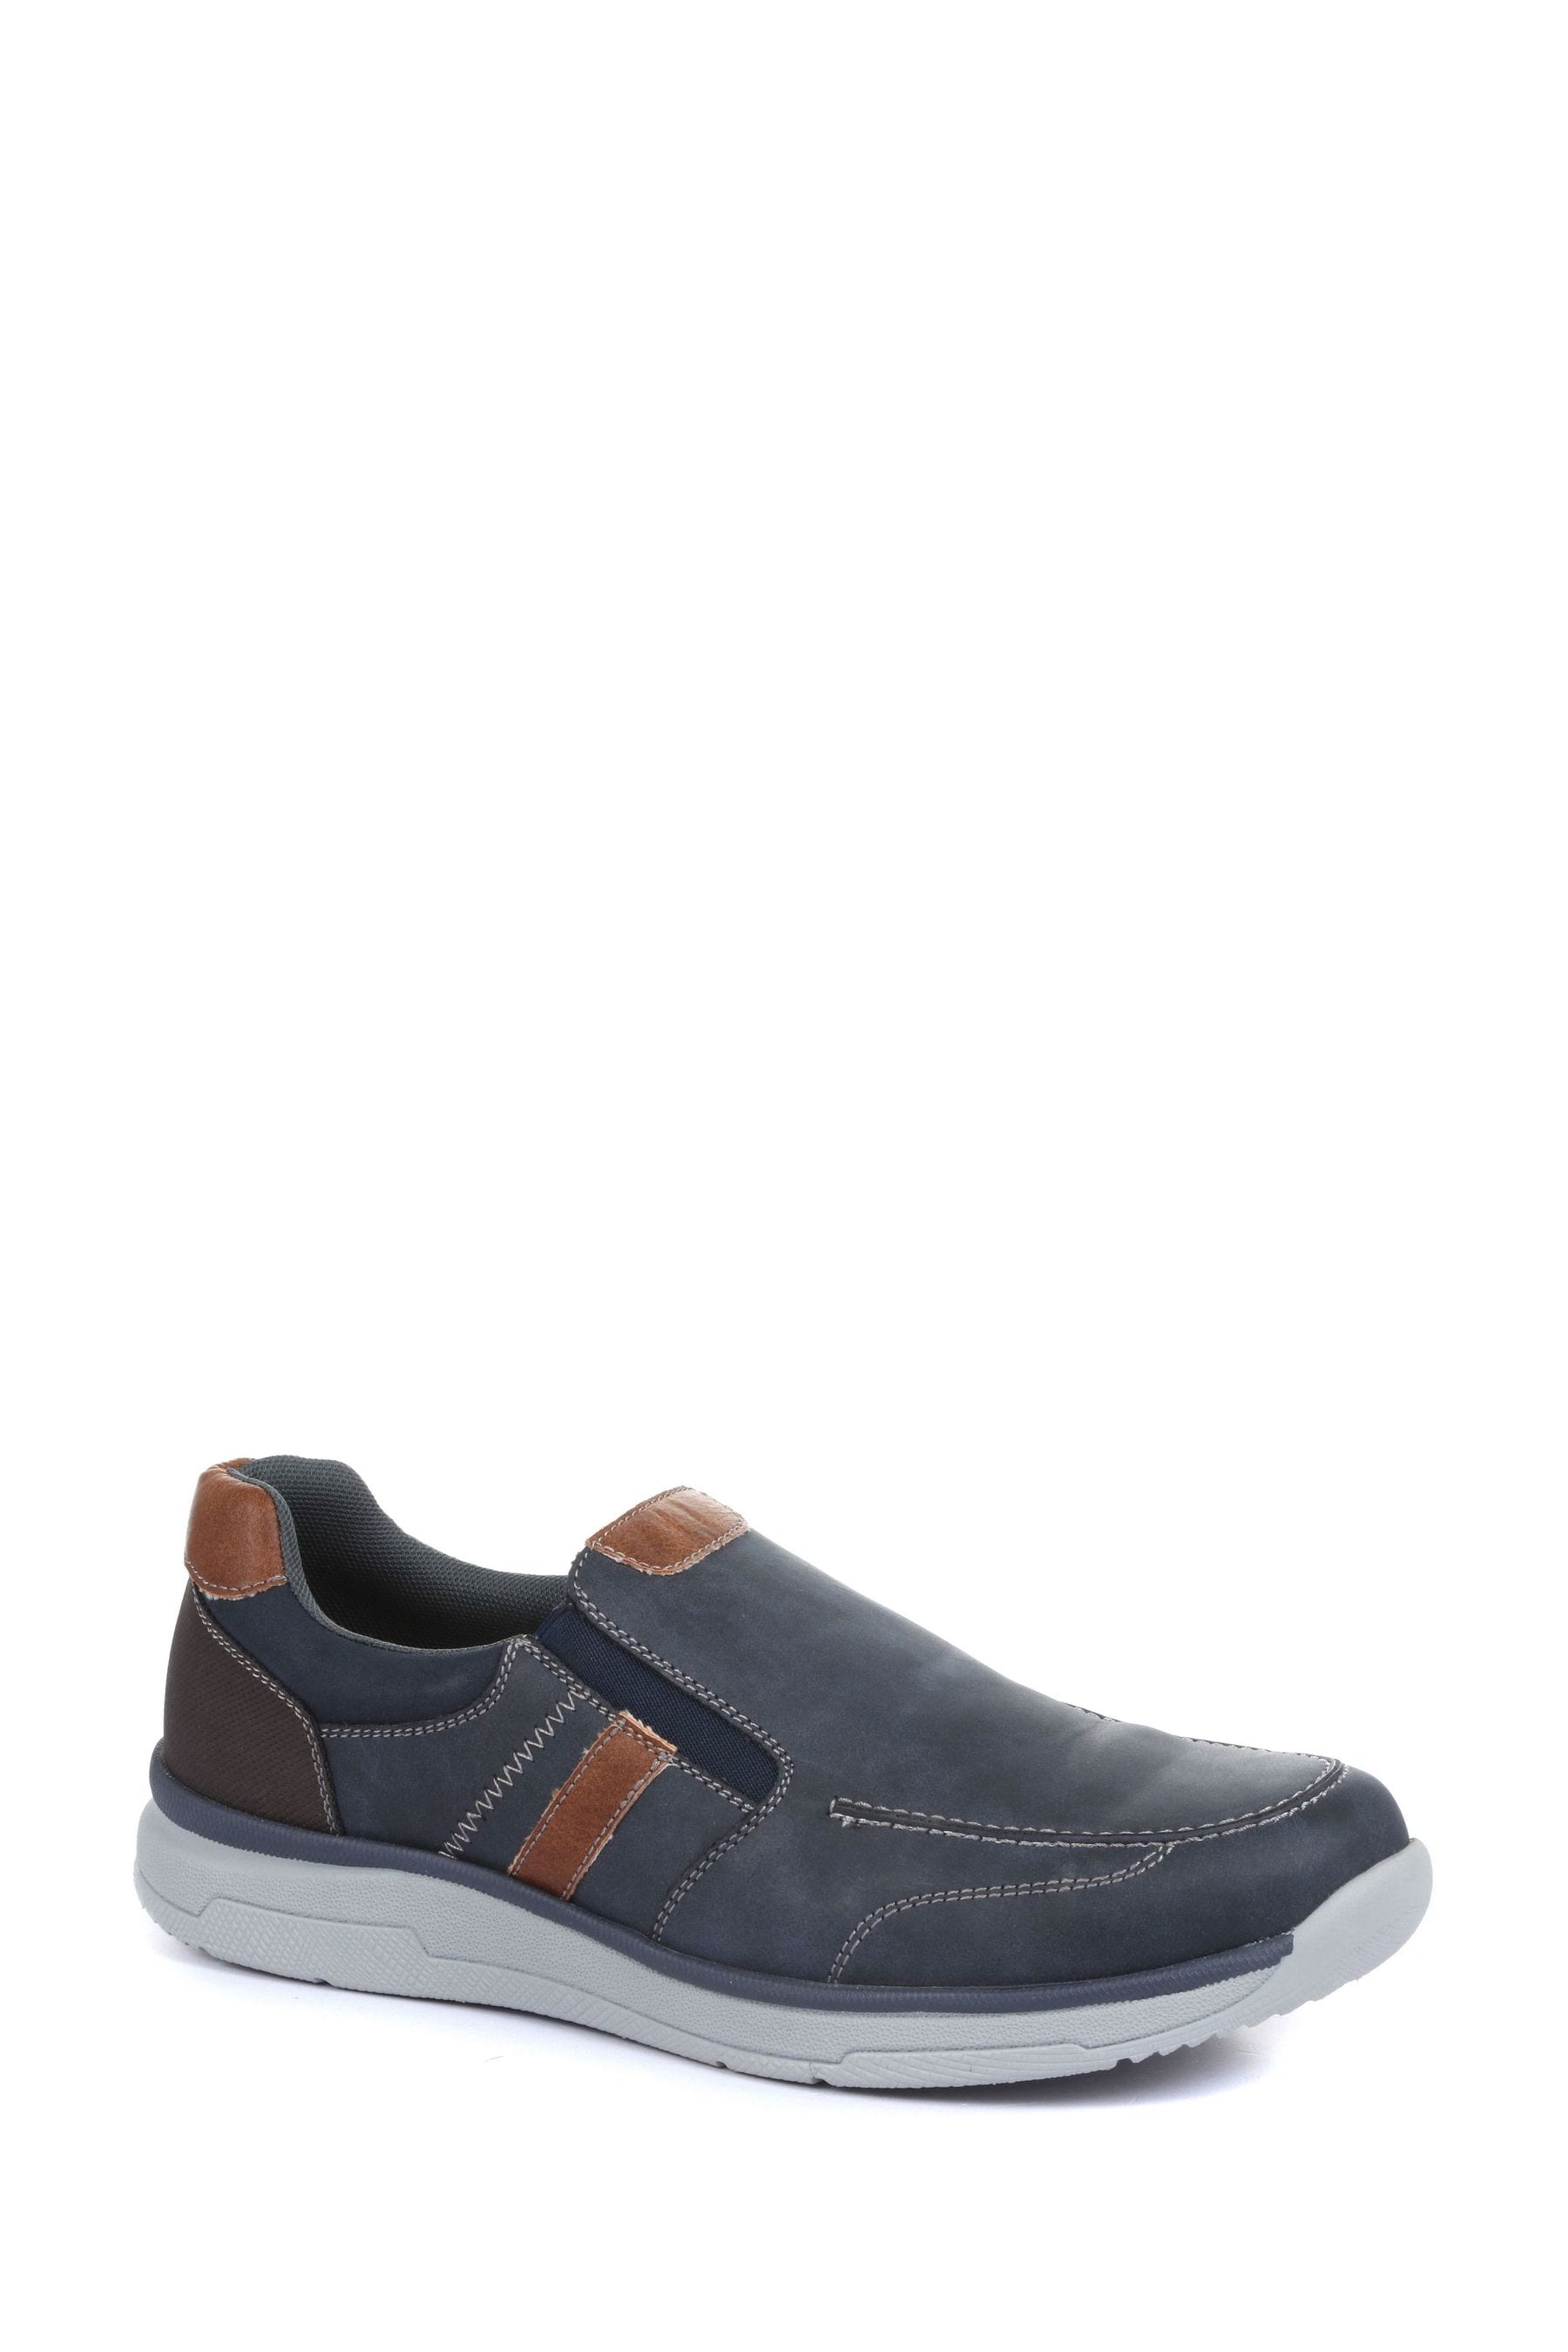 Buy Pavers Mens Wide Fit Slip-On Trainers from Next Spain